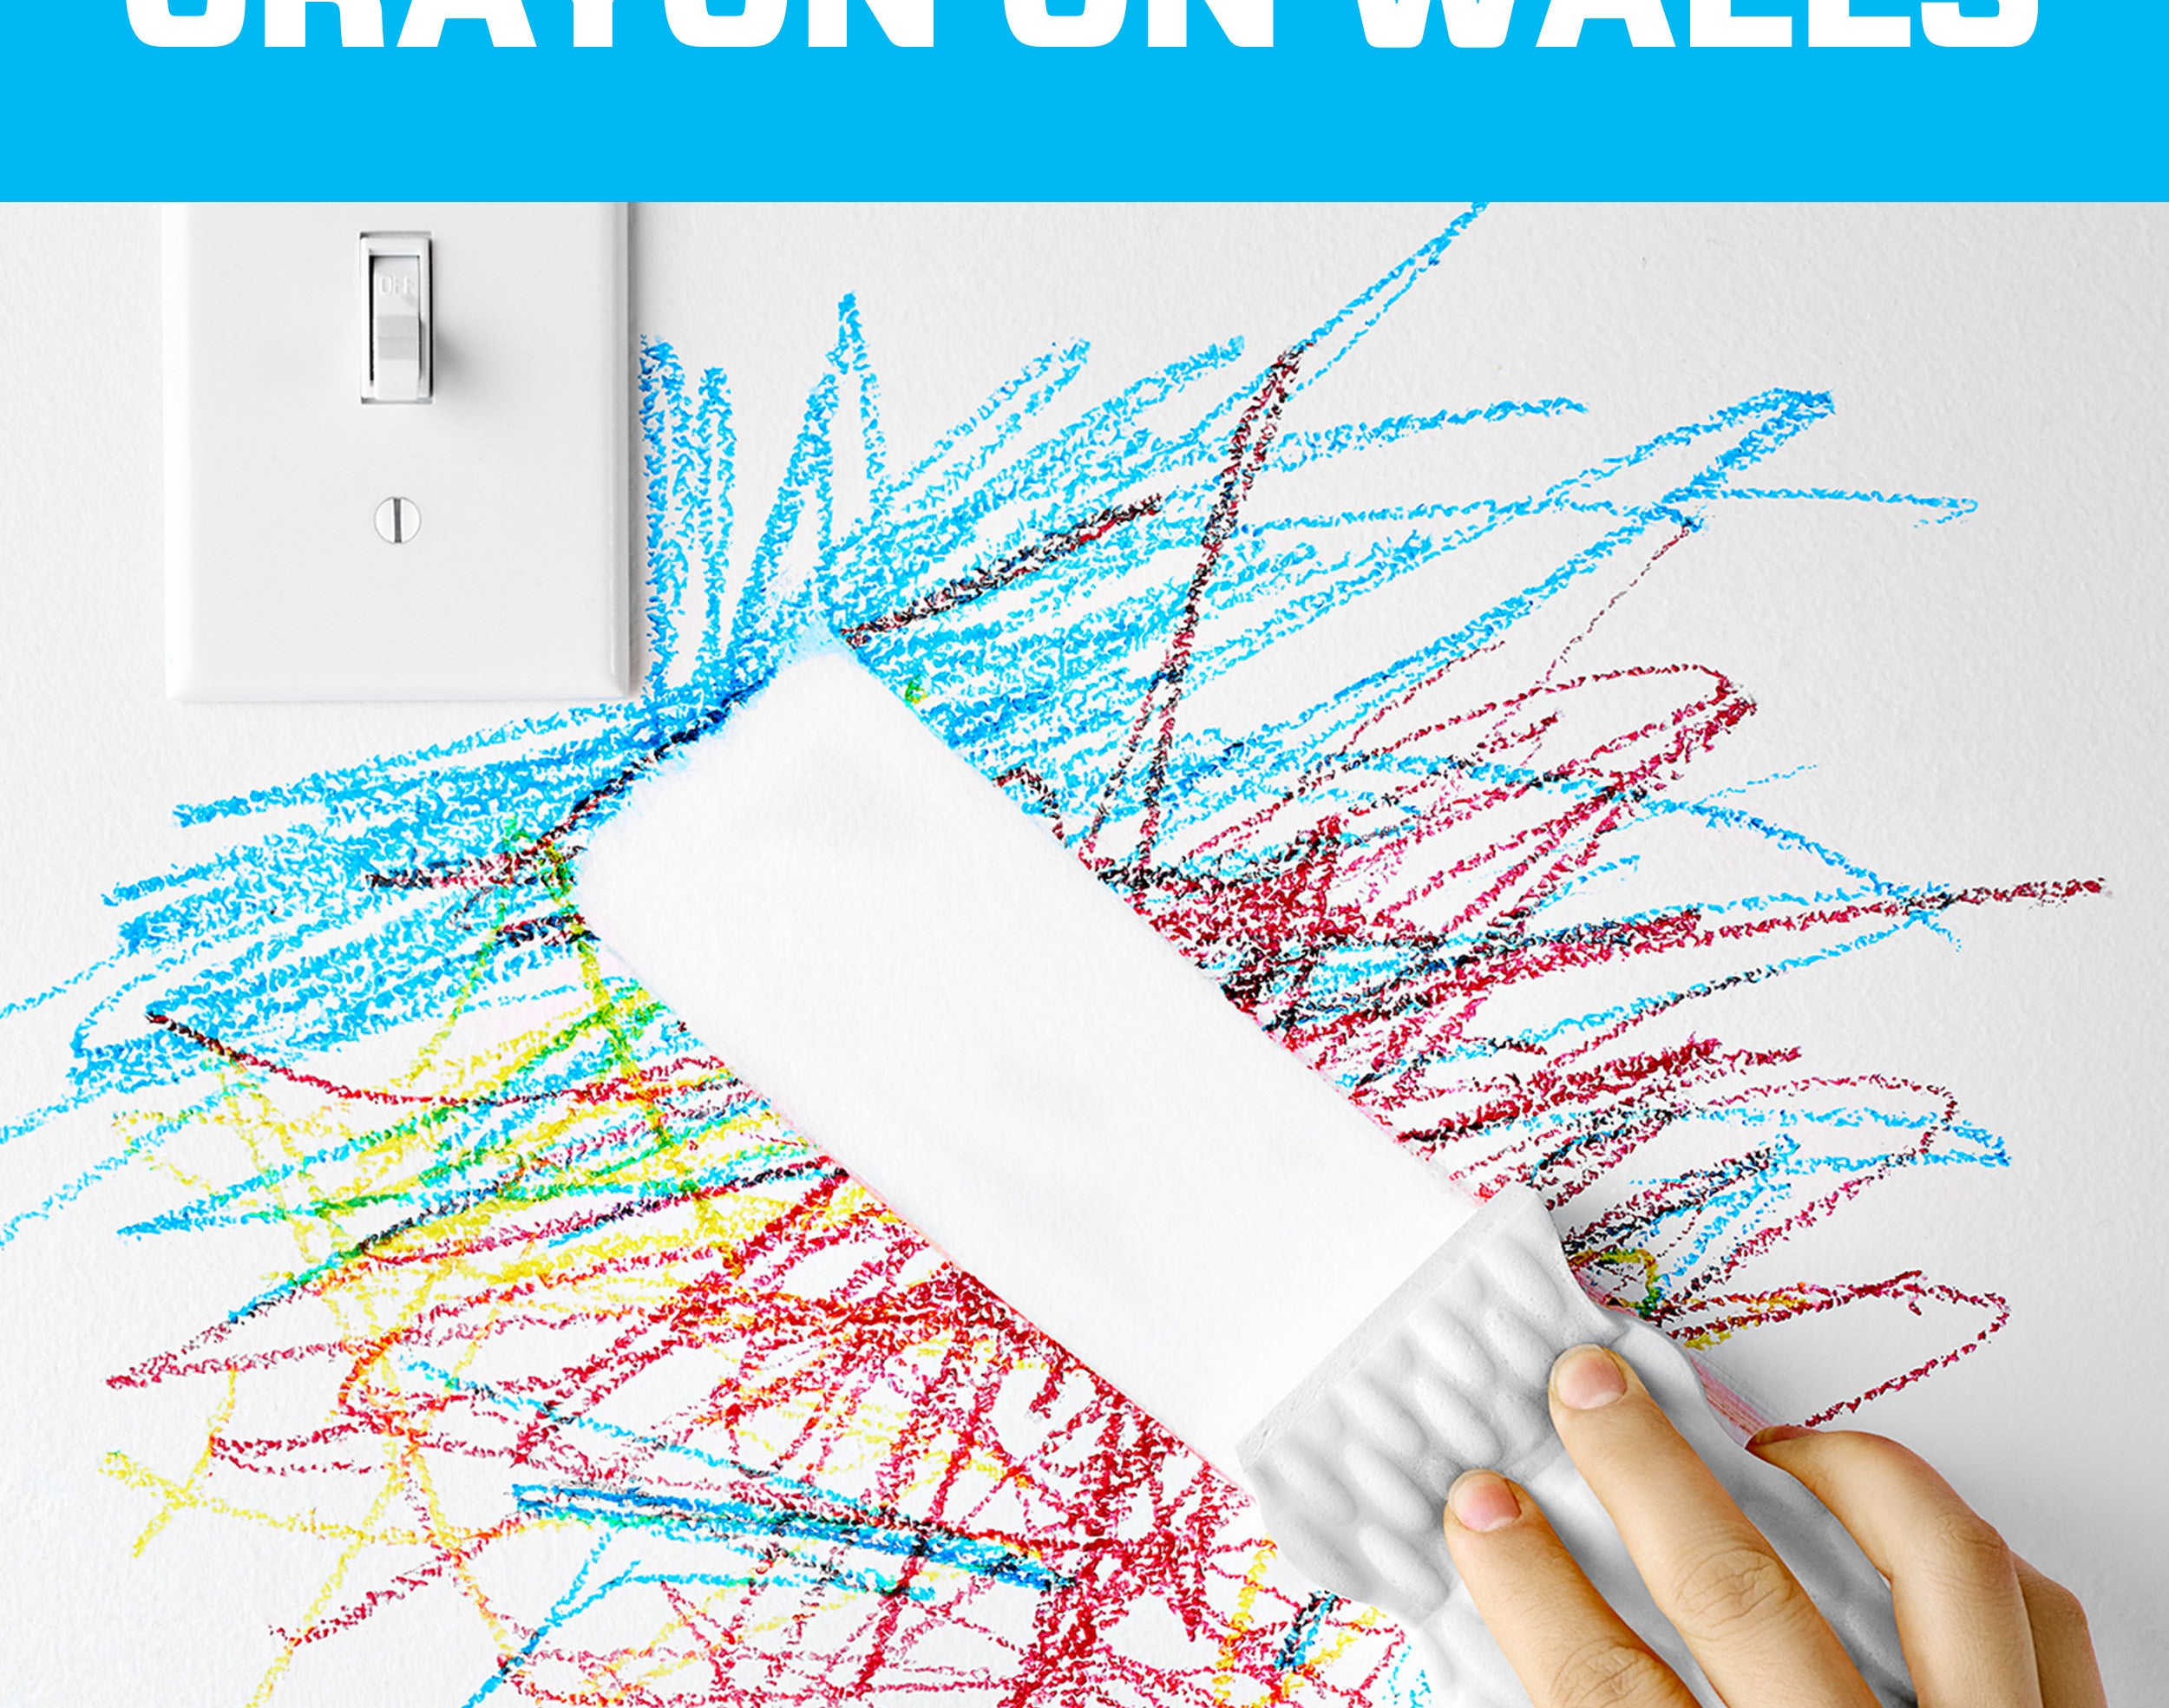 Magic eraser cleaning up crayon on the wall